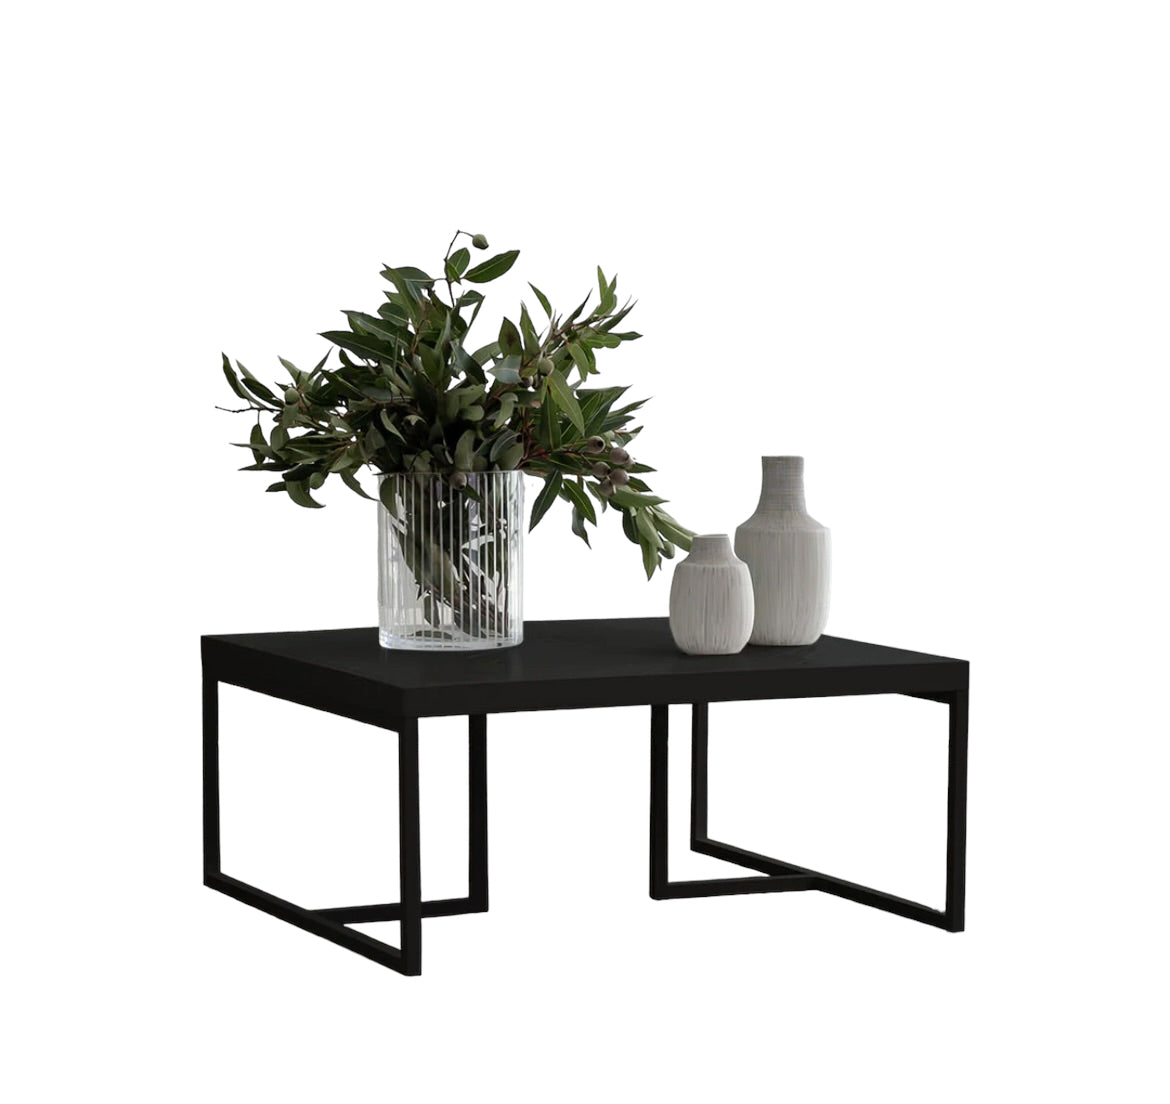 HAND MADE AXEL BLACK SCANDINAVIAN INSPIRED WOODEN COFFEE TABLE